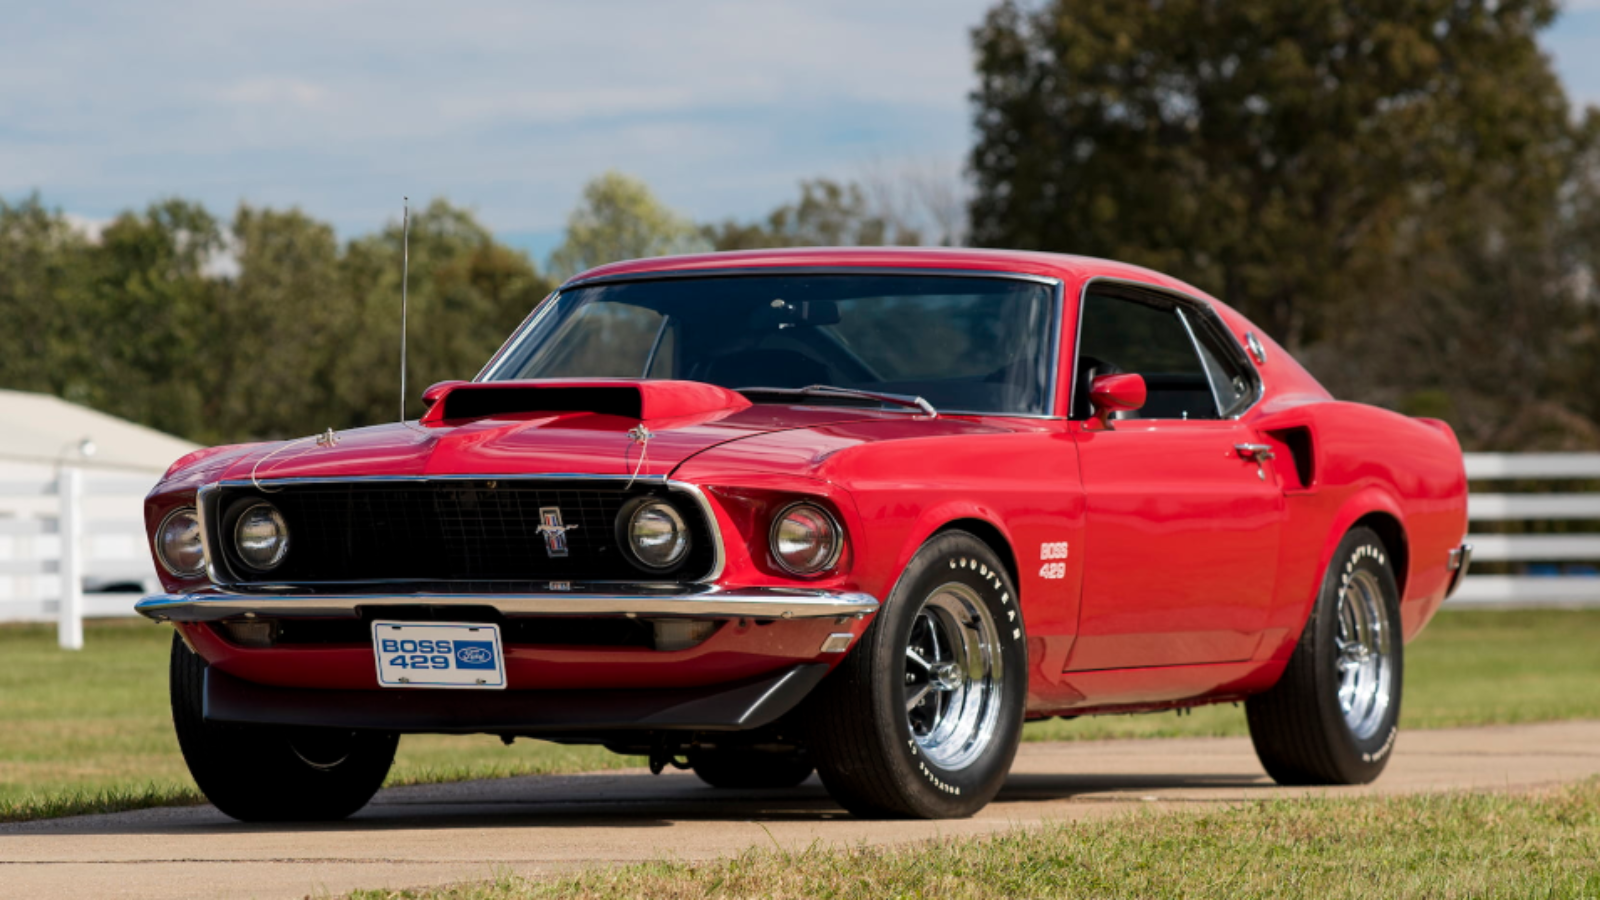 Shining Kristus Ferie This 1969 Mustang Boss 429 Fastback is The Essence of Cool |  Themustangsource